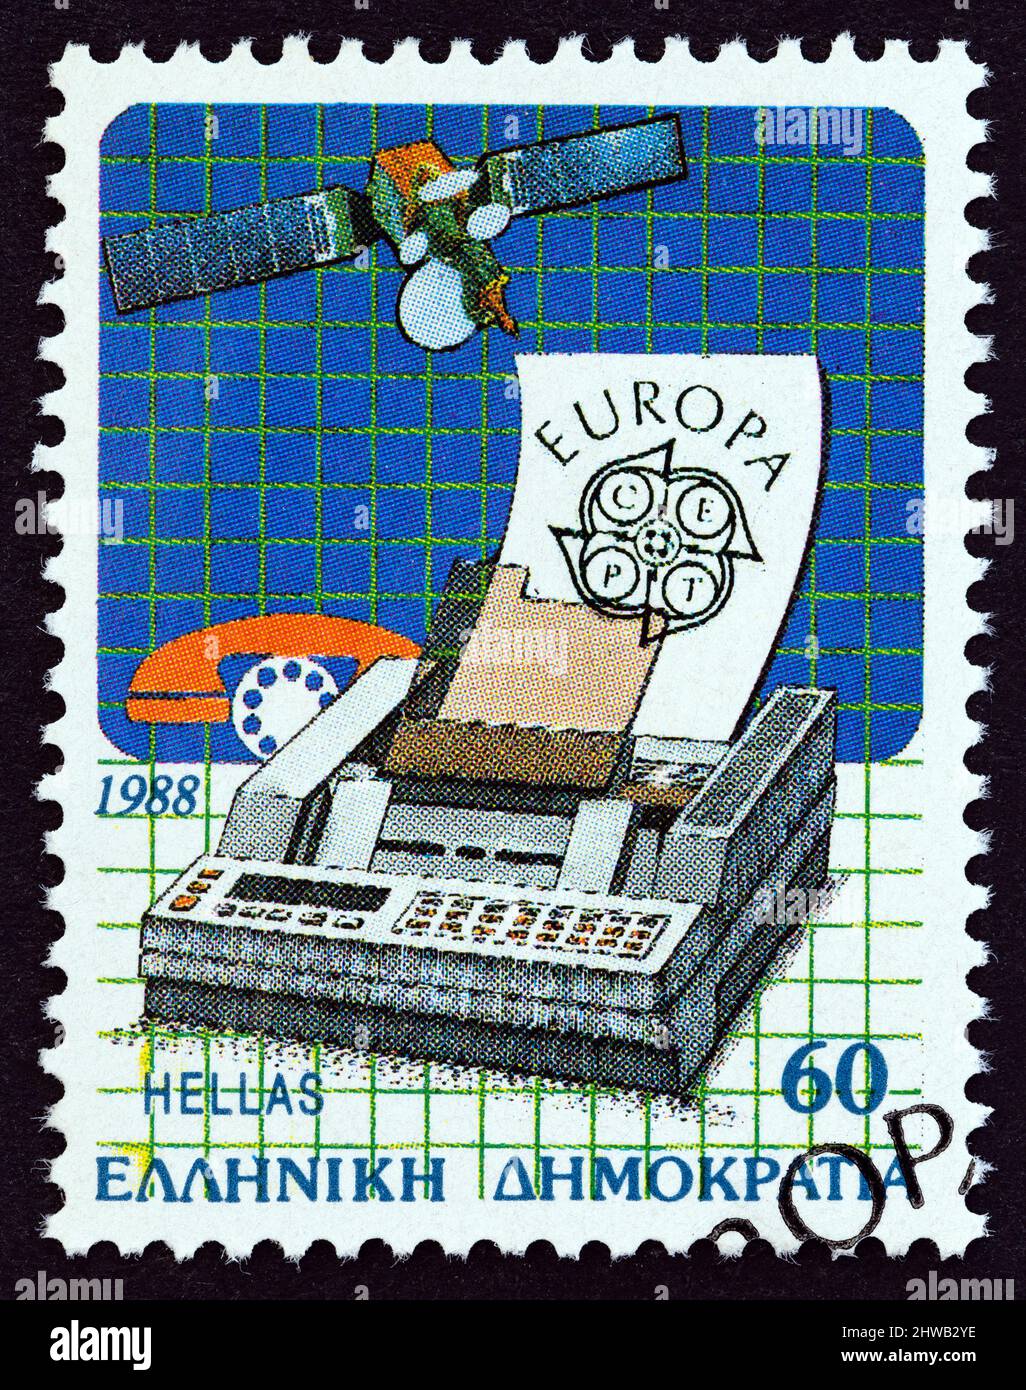 GREECE - CIRCA 1988: A stamp printed in Greece from the 'Europa. Transport and Communications' issue shows Satellite and Fax Machine, circa 1988. Stock Photo